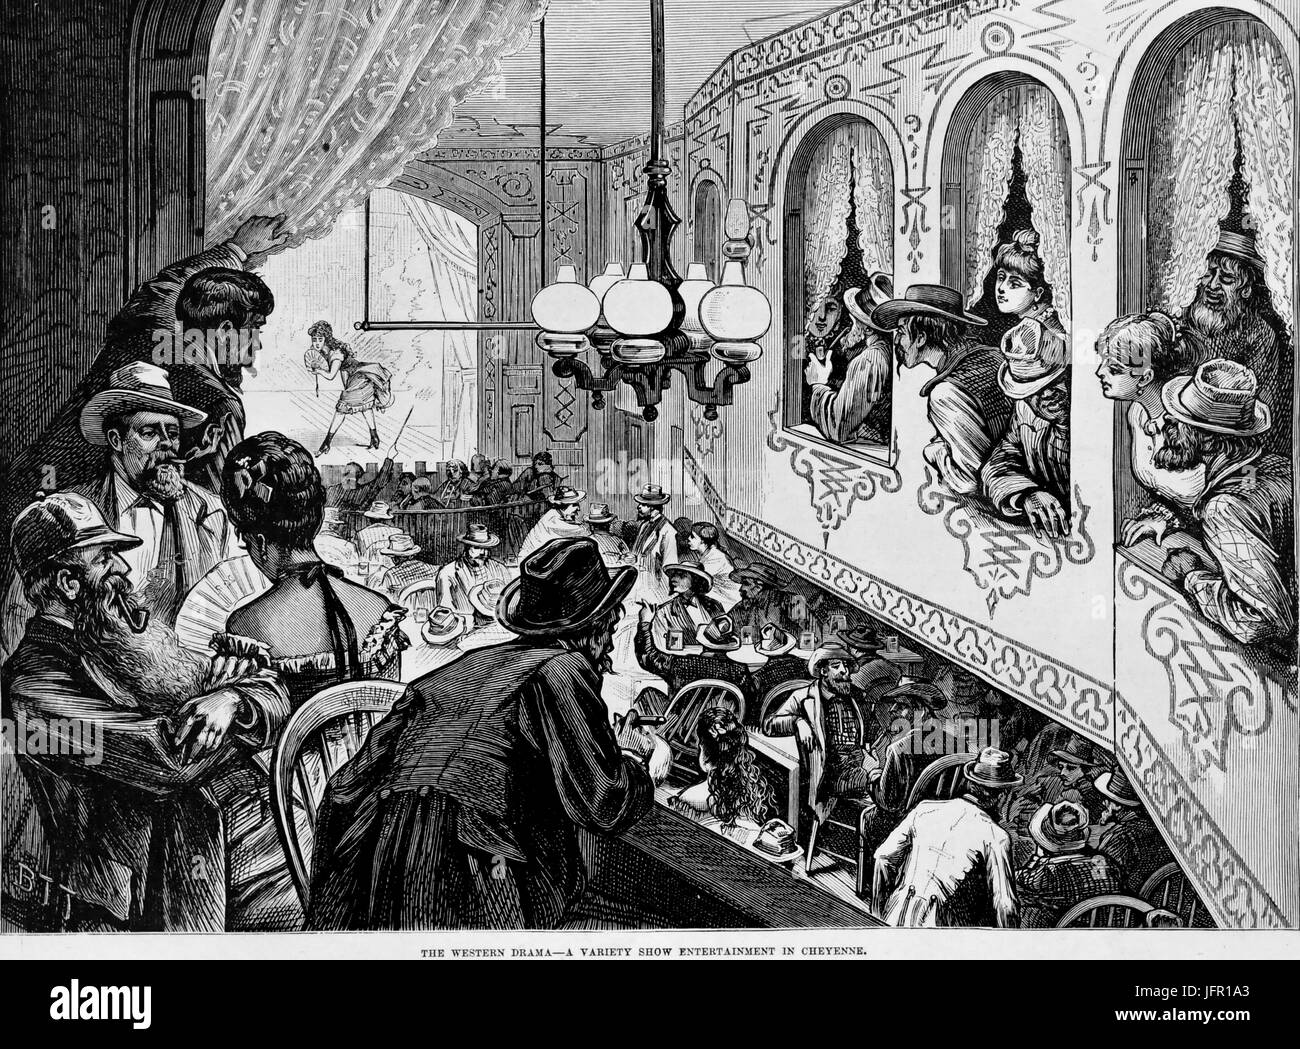 Illustration showing a variety show entertainment in a saloon, Cheyenne, WY, 1870s. Stock Photo